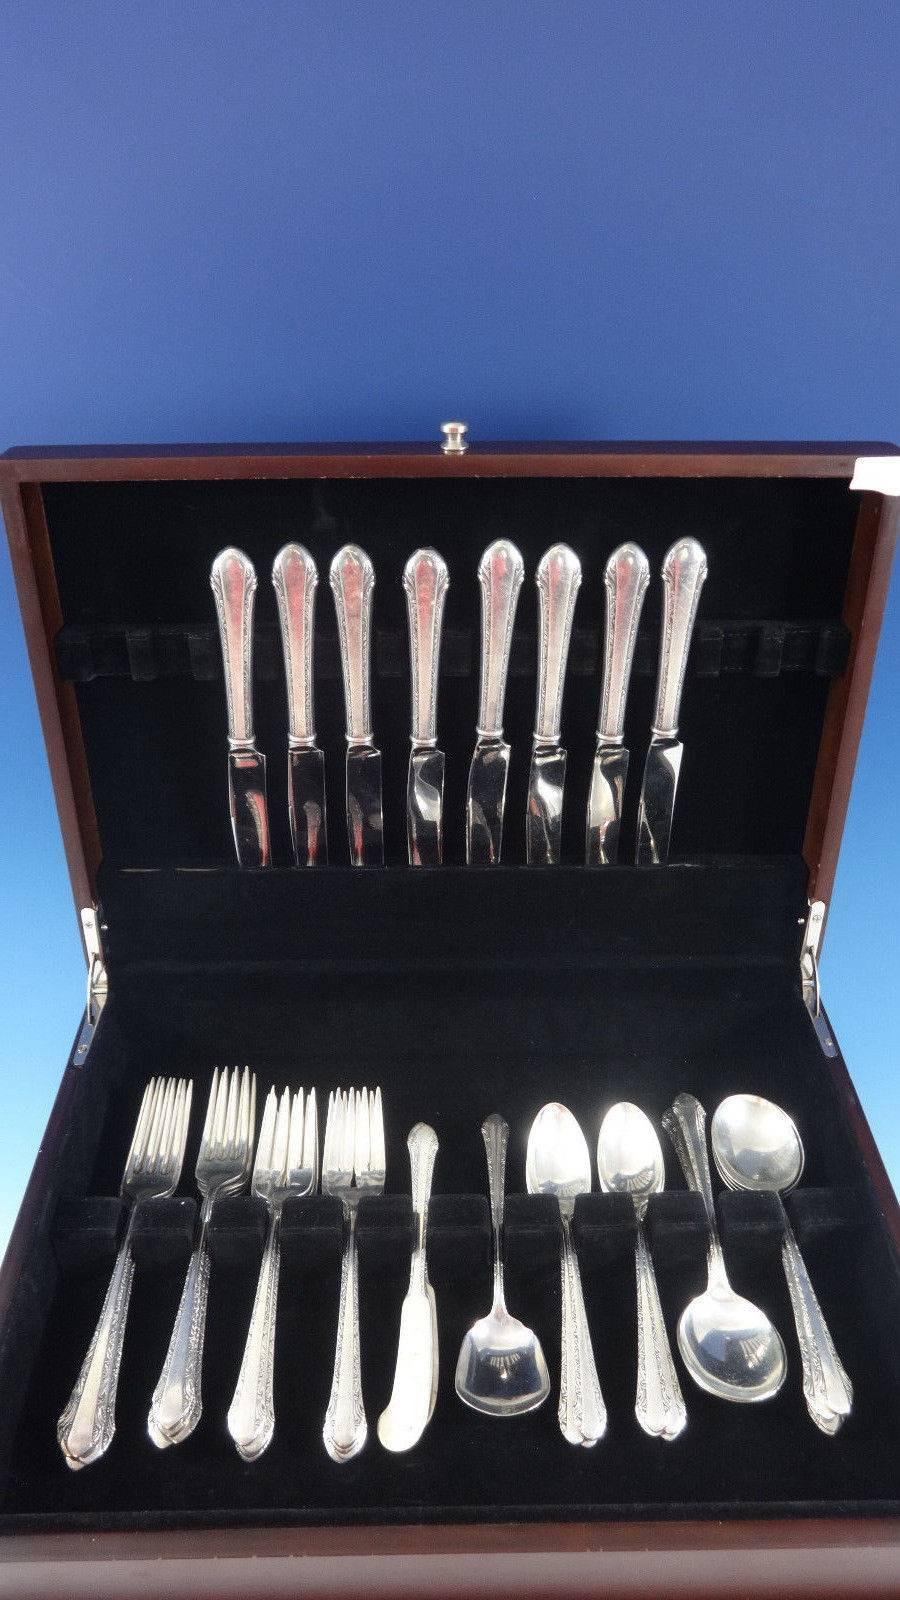 Chased Romantique by Alvin sterling silver flatware set of 49 Pieces. This set includes:

Eight knives, 9